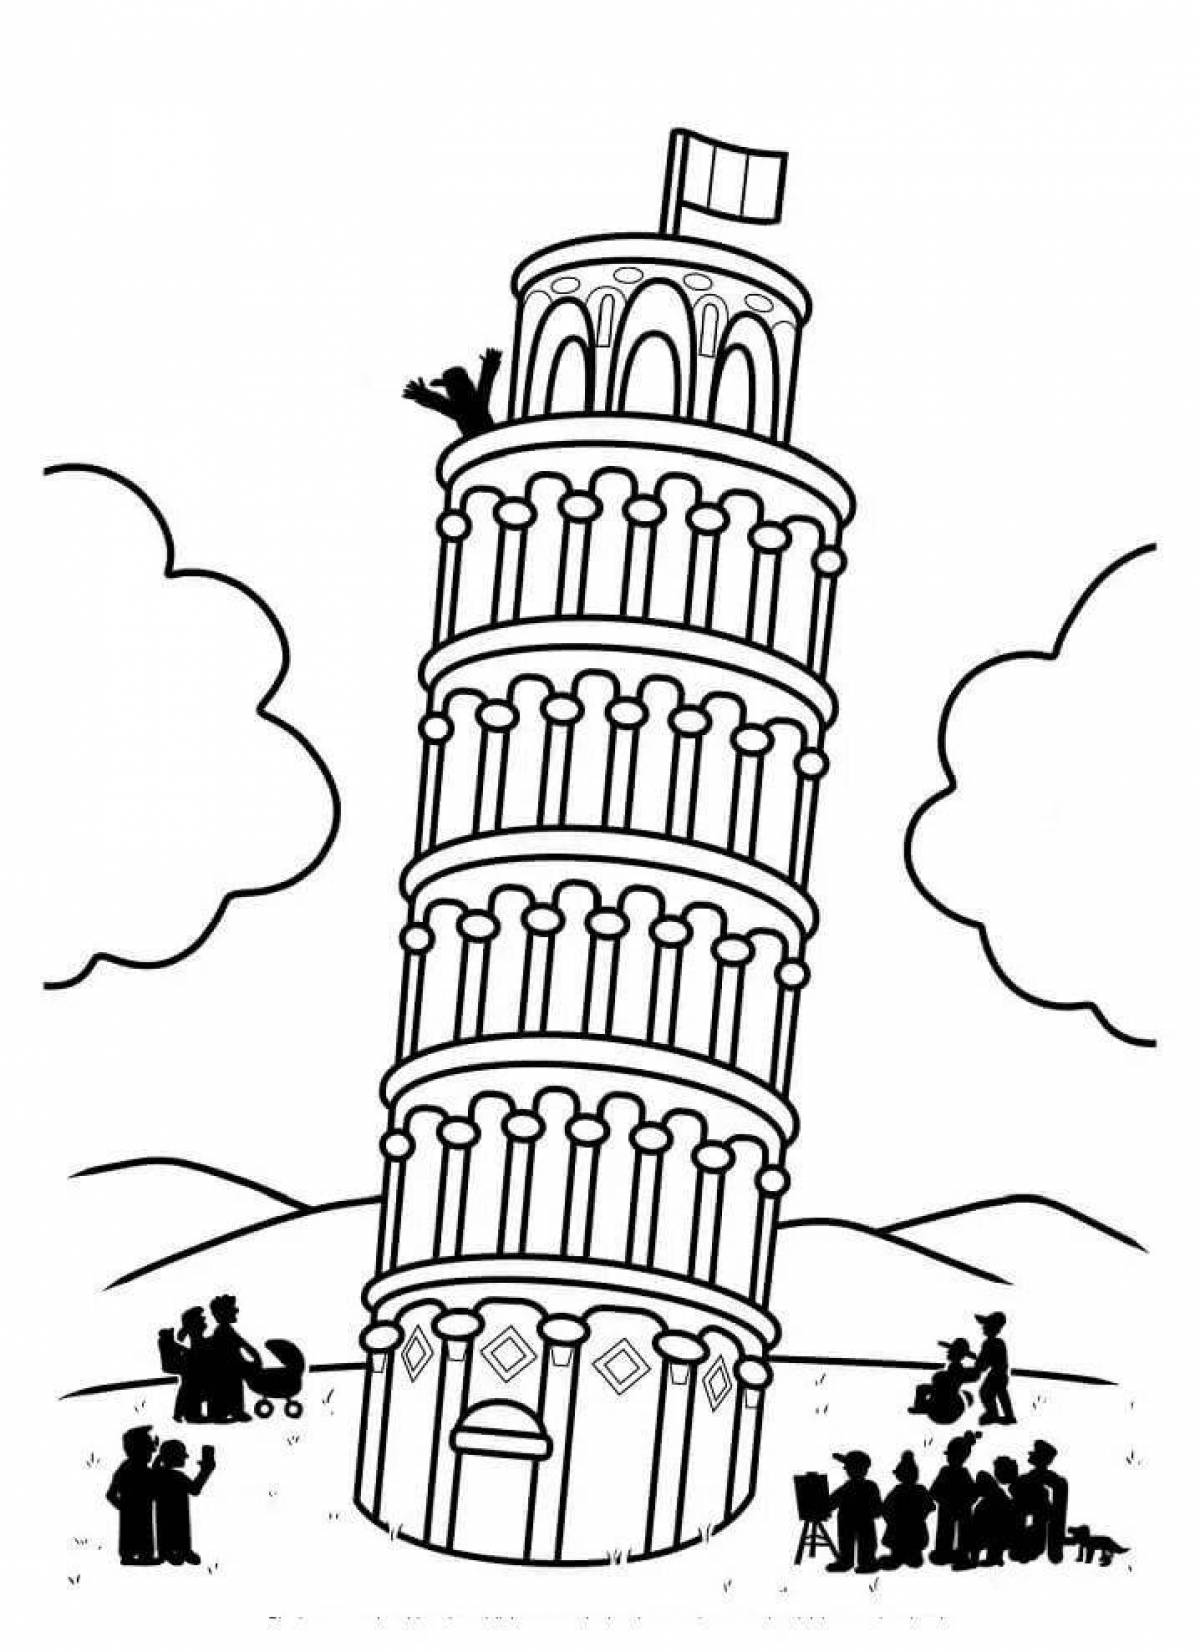 Large coloring of the Leaning Tower of Pisa